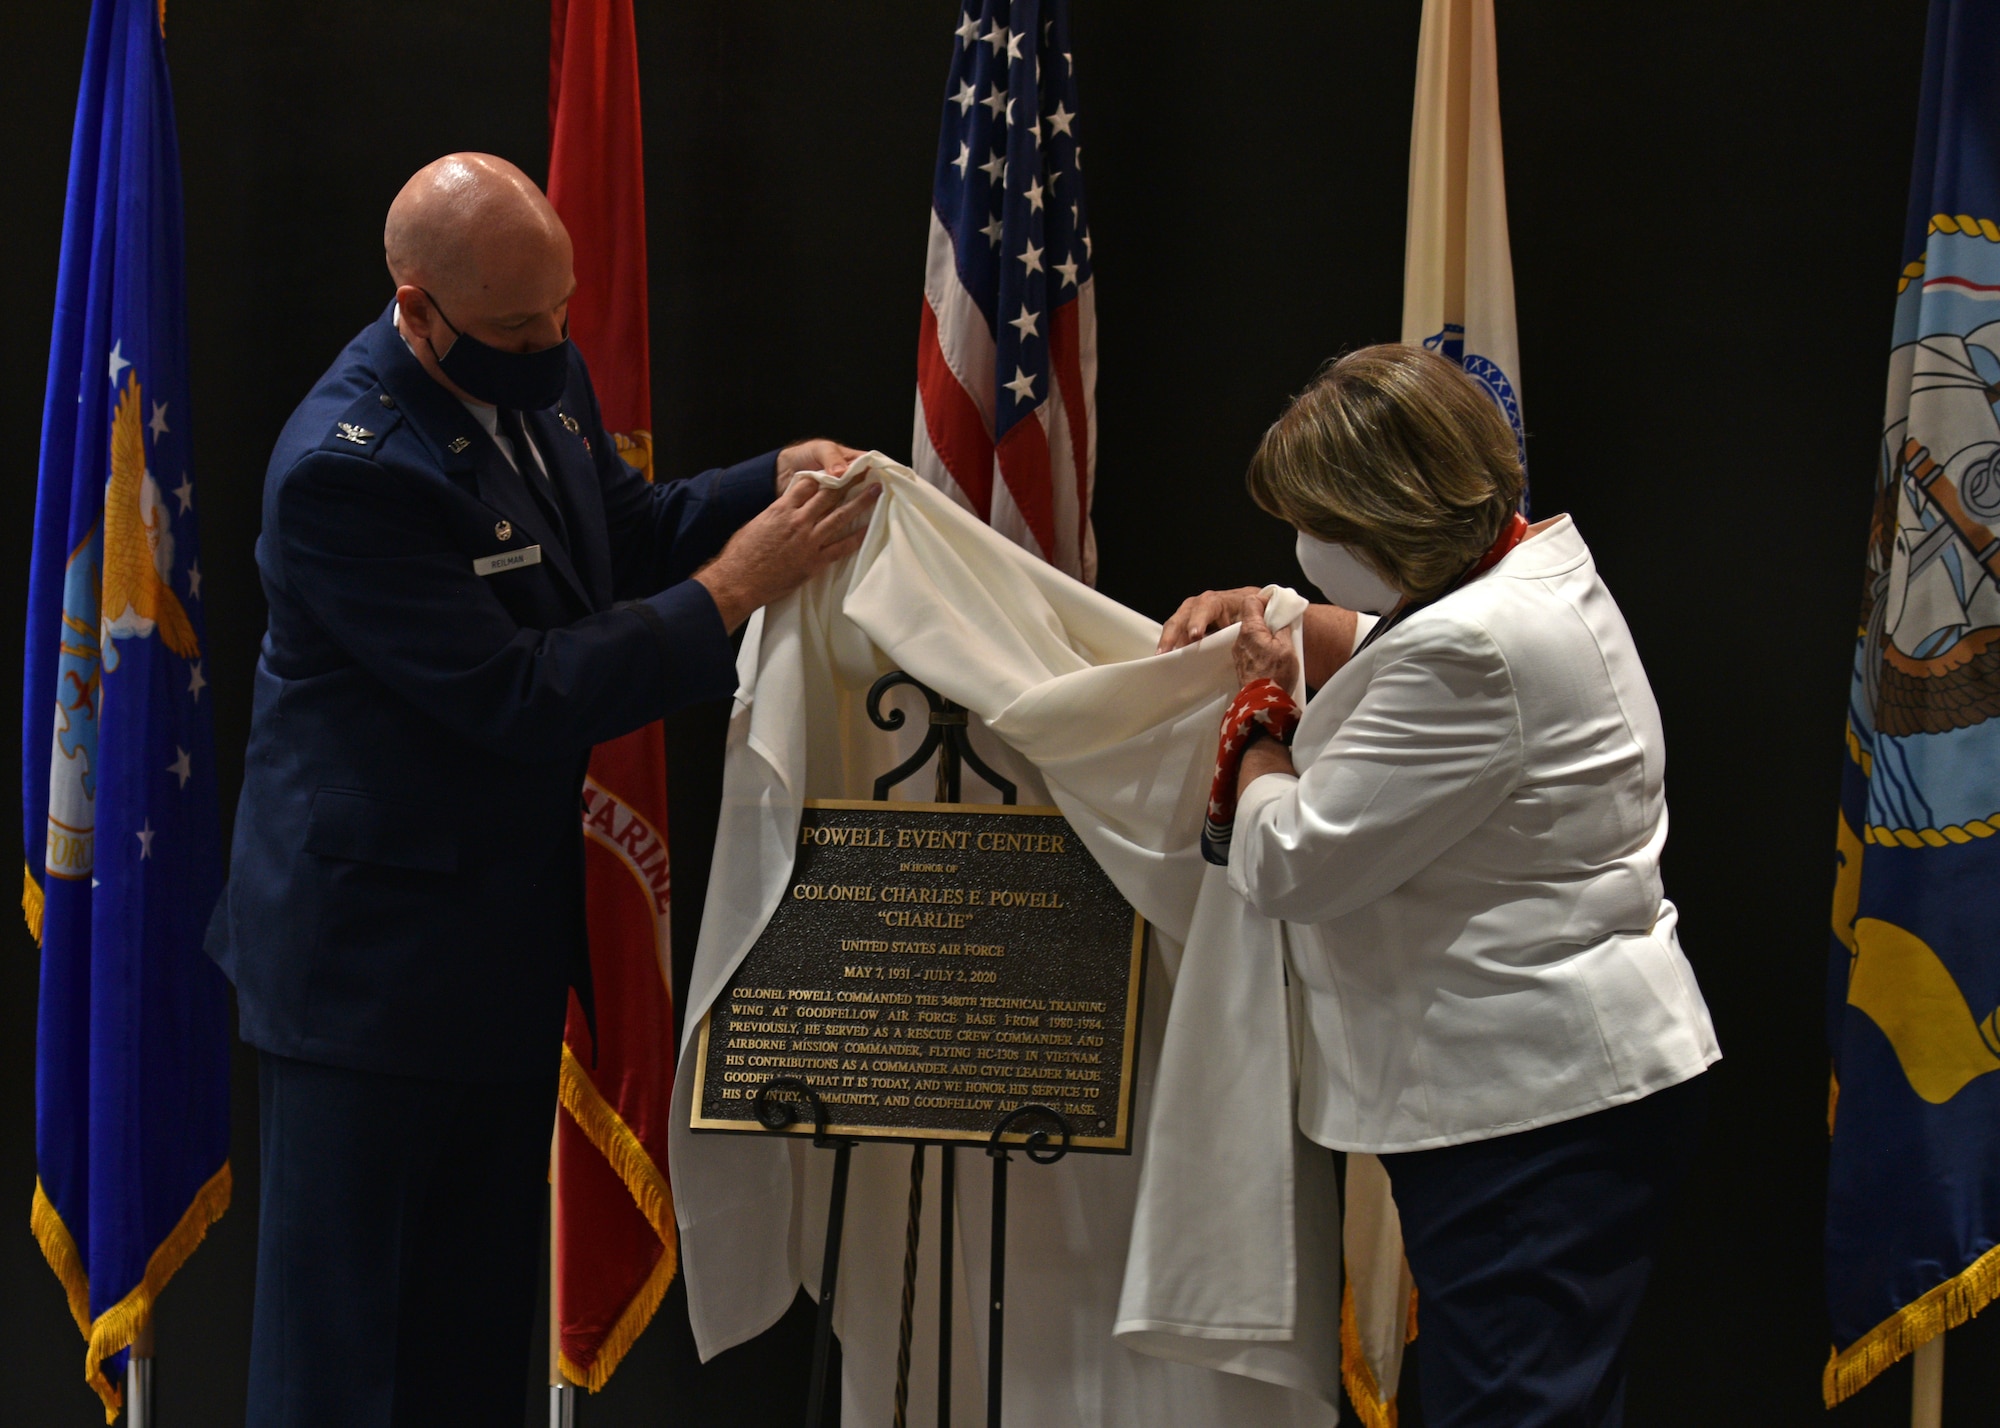 U.S. Air Force Col. Matthew Reilman, 17th Training Wing commander, and Theresa Ann McKinney, daughter of U.S. Air Force Retired Col. Charles E. Powell and JoAnne Powell, unveil the dedication plaque during the Powell Event Center dedication ceremony on Goodfellow Air Force Base, Sept. 10, 2021. Theresa and several family members were in attendance to remember and honor the legacy of Charles and JoAnne Powell. (U.S. Air Force photo by Senior Airman Ashley Thrash)